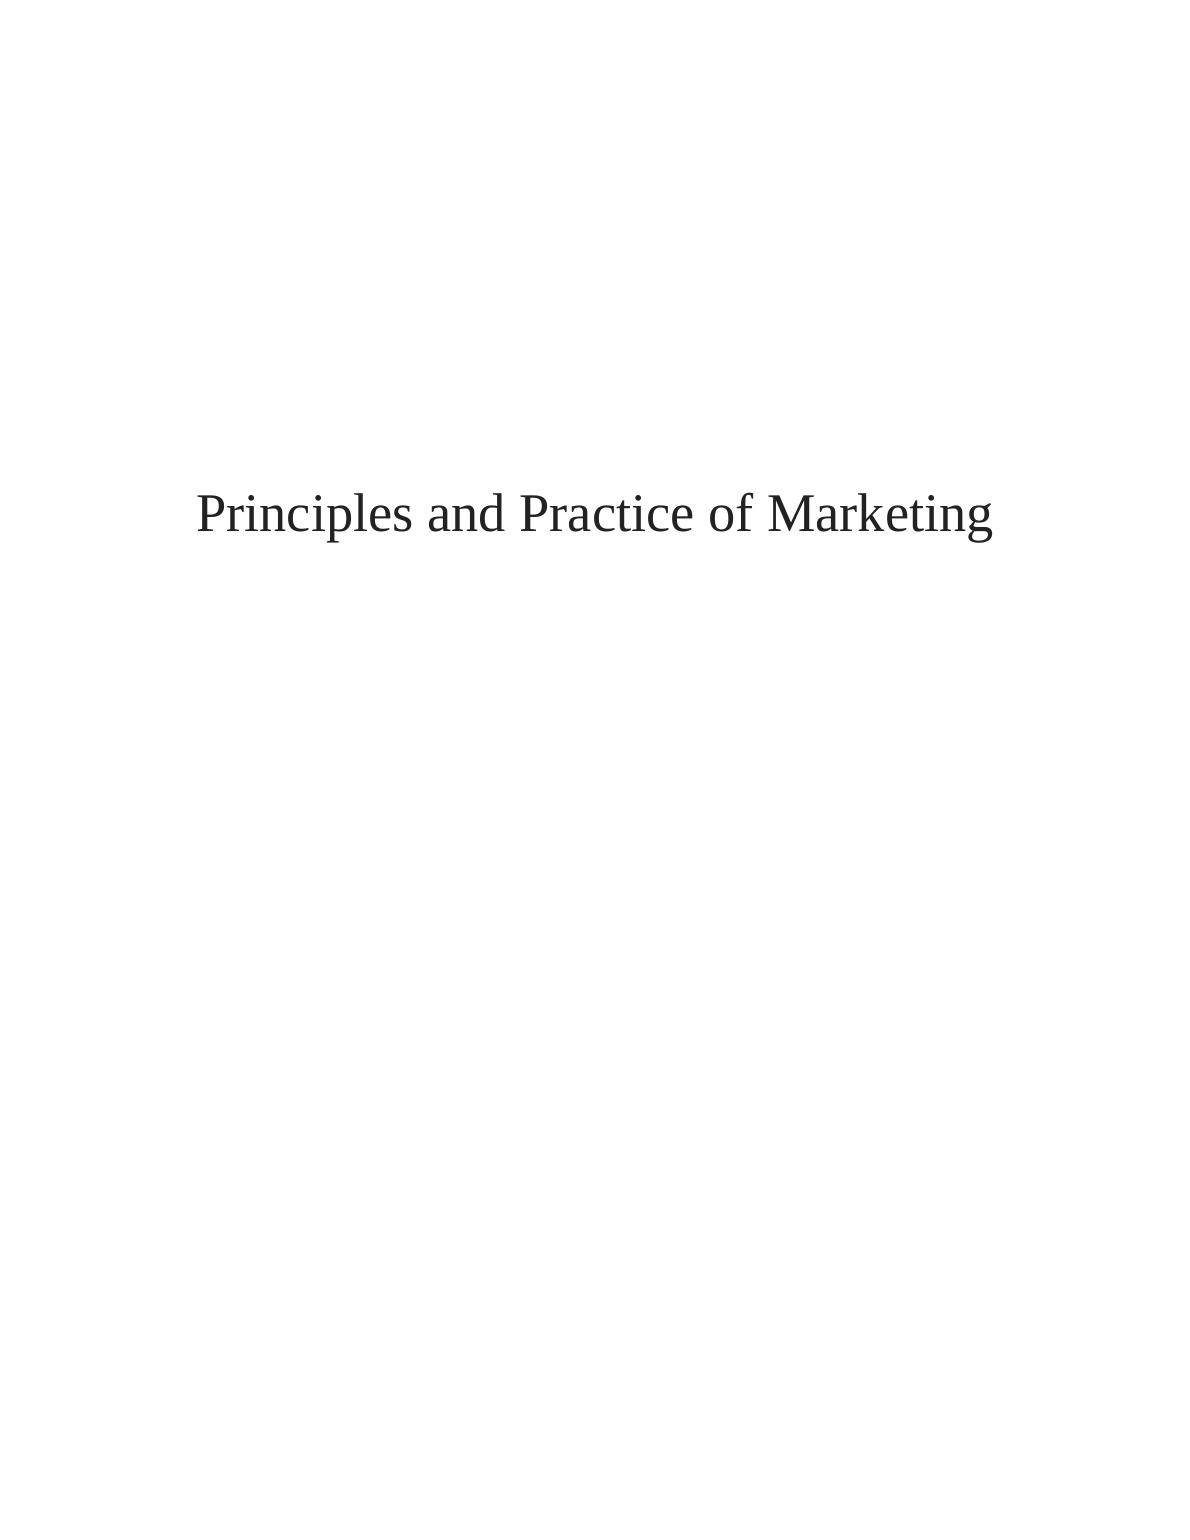 Principles and Practice of Marketing of Tesco_1